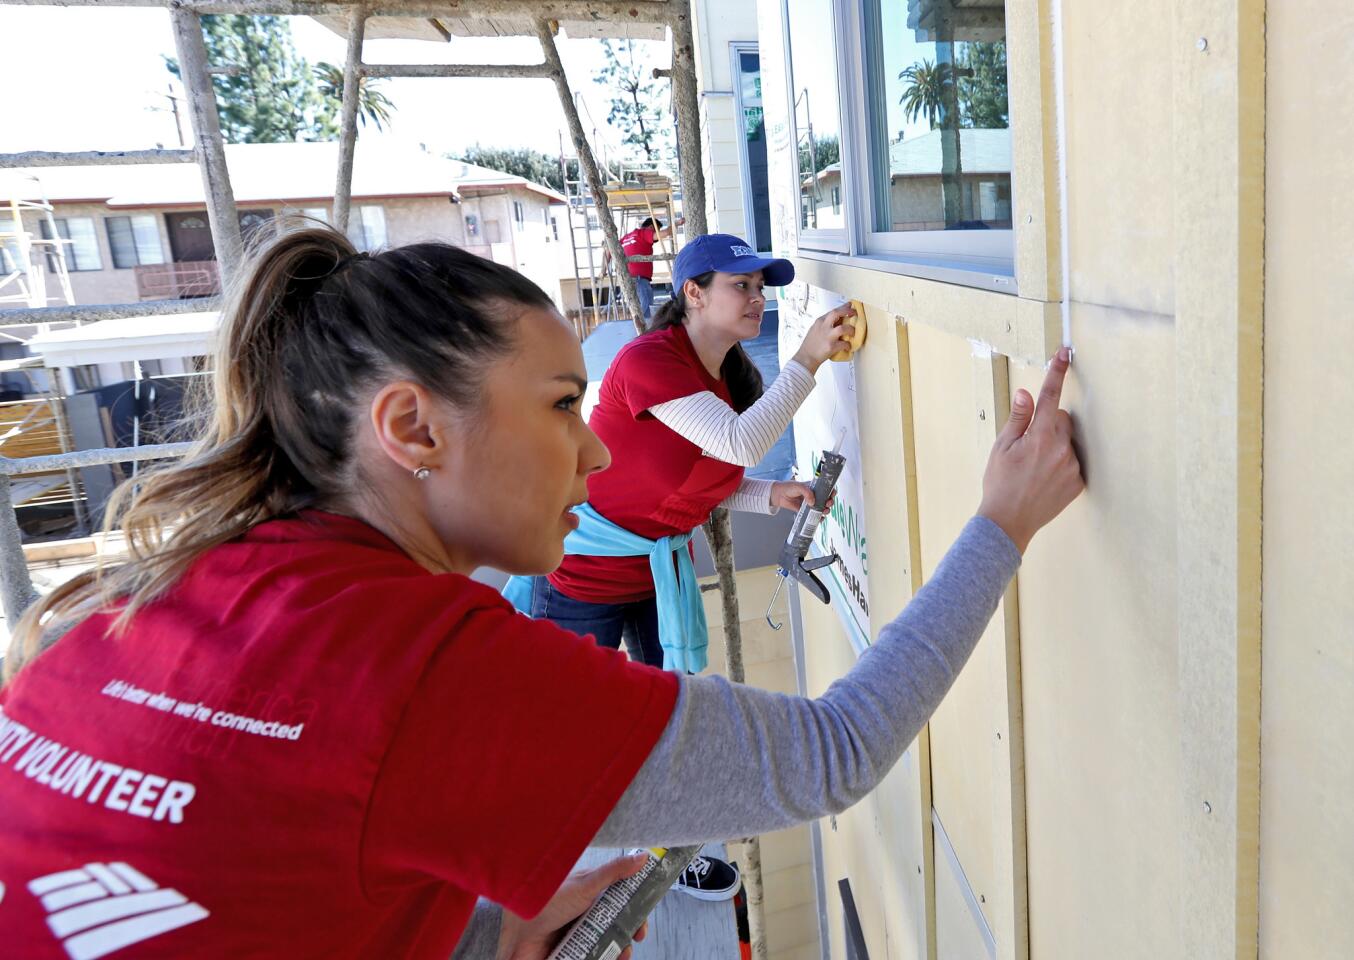 Bank of America employees Yasmin Semerdjian, left, and Yesenia De Leon, right, caulk around windows on a six-home complex being built by the San Gabriel chapter of Habitat for Humanity, on the 700 block of Lomita Ave., in Glendale on Saturday, March 16, 2019.